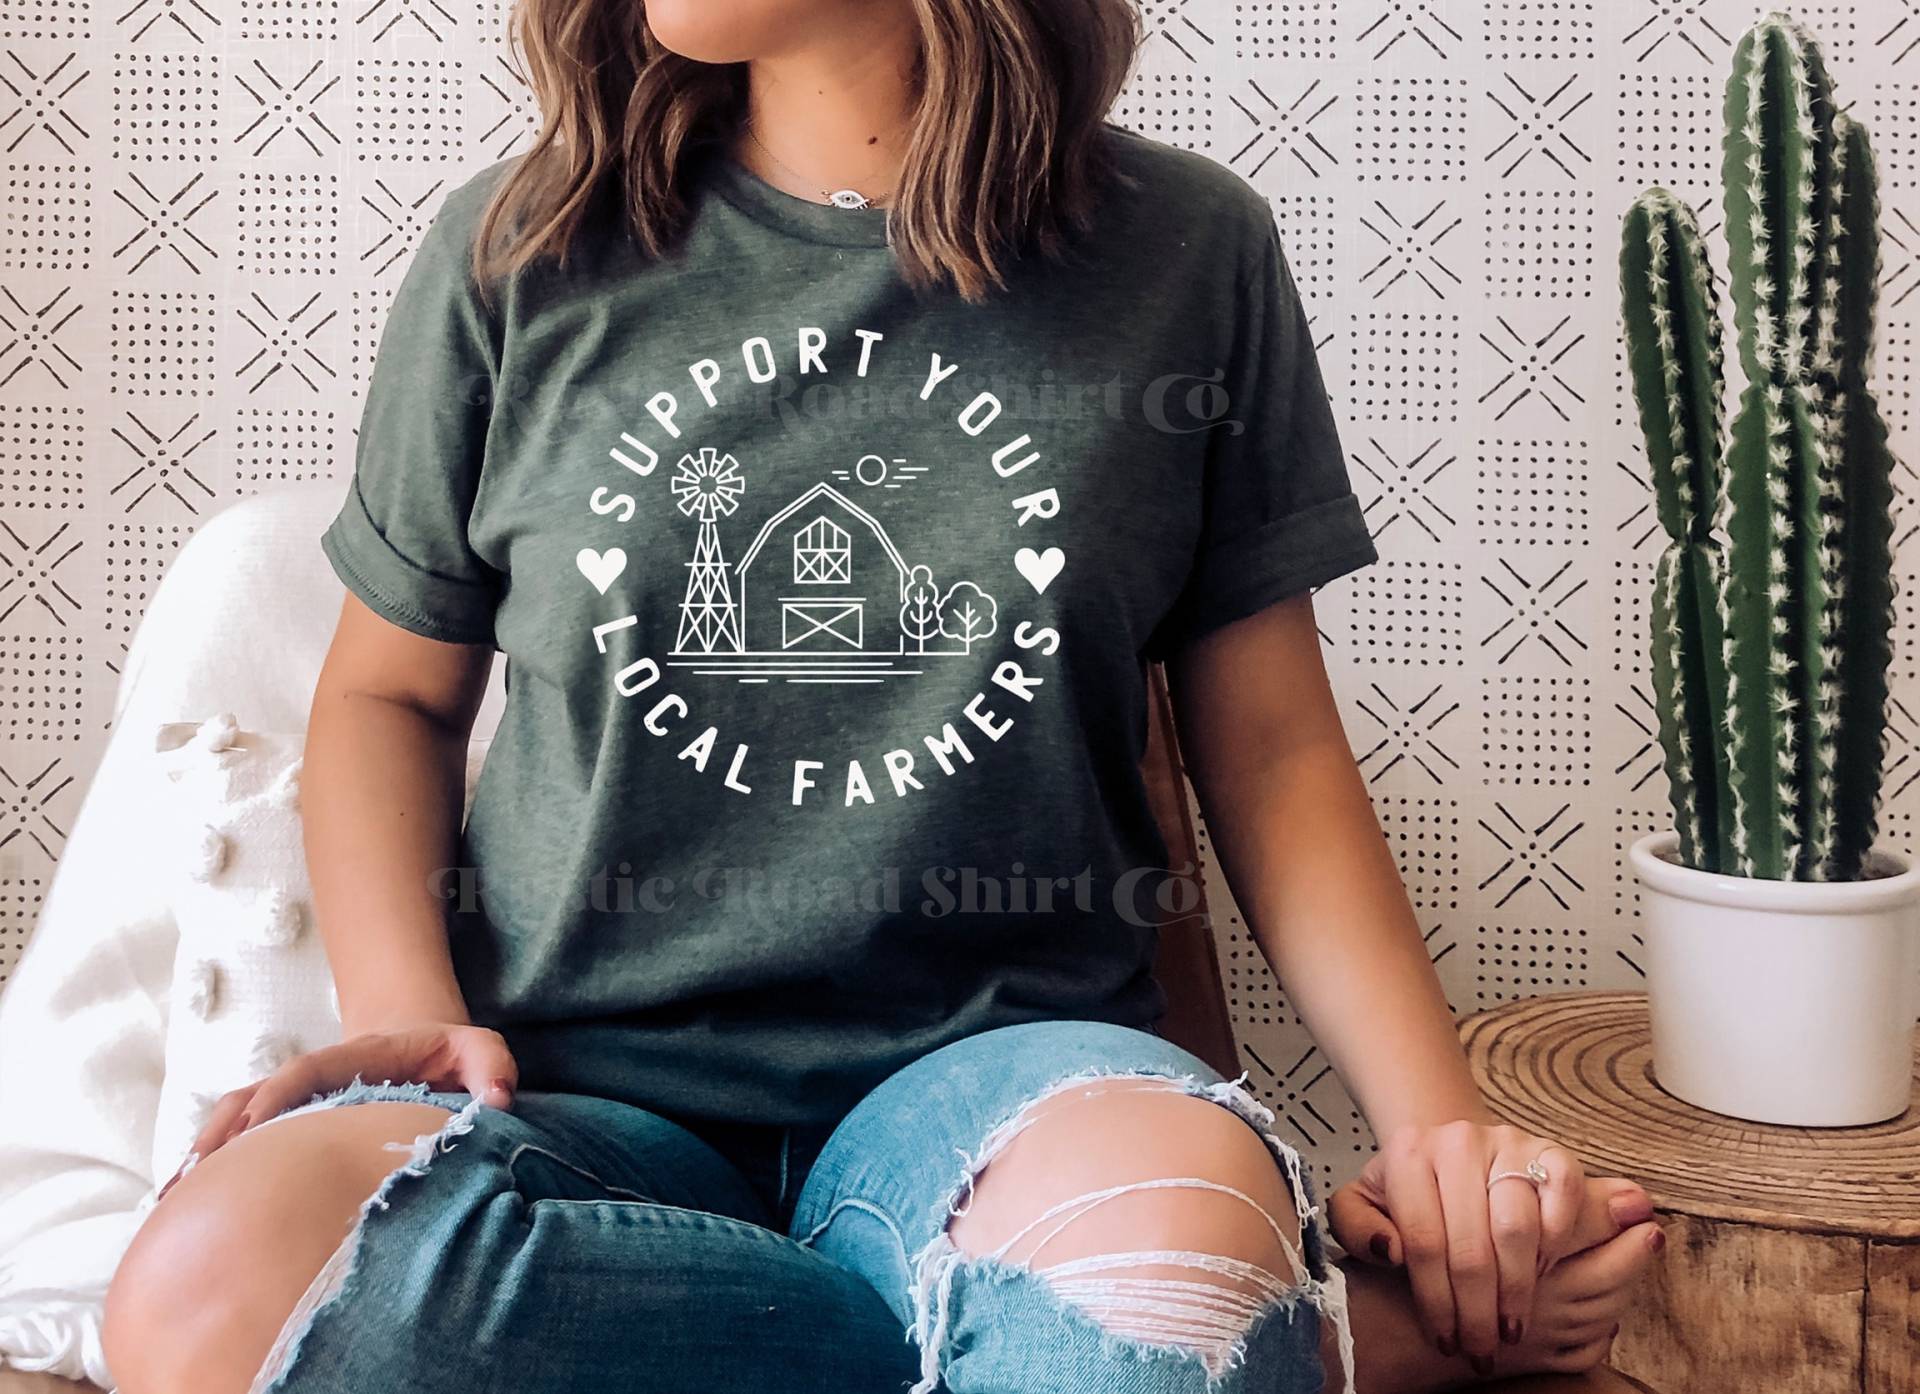 Support Local Farmers Shirt, Country Girl Farm Small Business von RusticRoadShirtCo